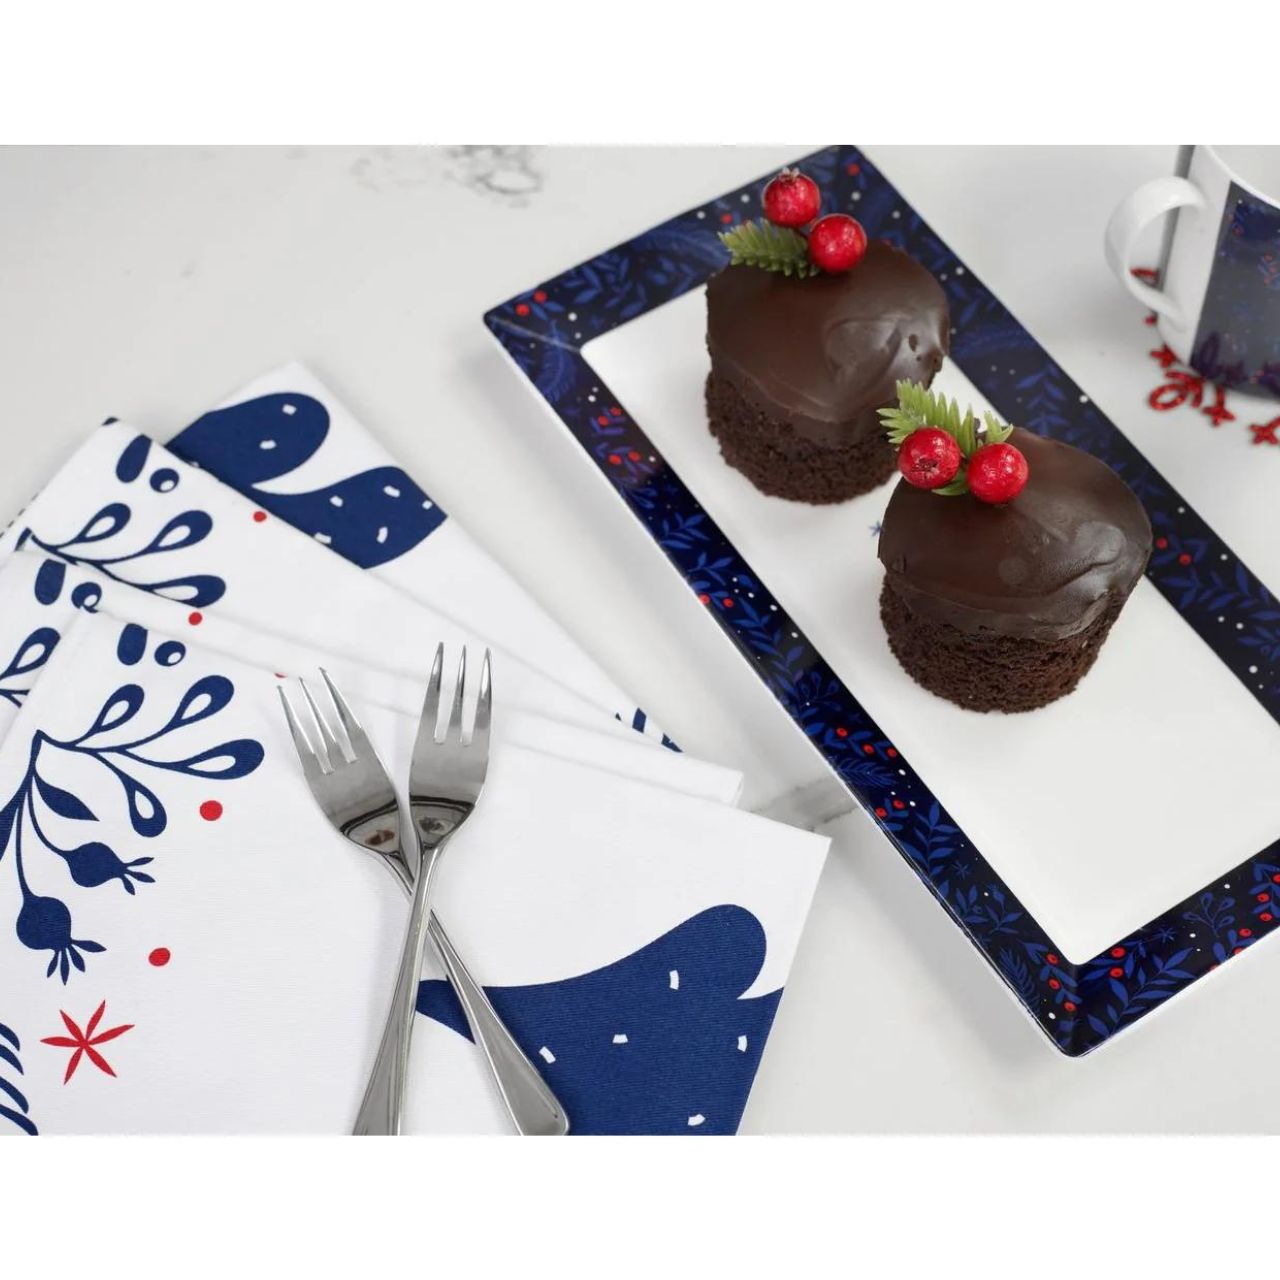 Midnight Blue Christmas Platter Set of 2 by Mindy Brownes  Introducing our set of two Christmas platters. Rectangular in design these plates have a simple yet festive pattern and curved rim for stylish serving of cakes, cookies, and more.